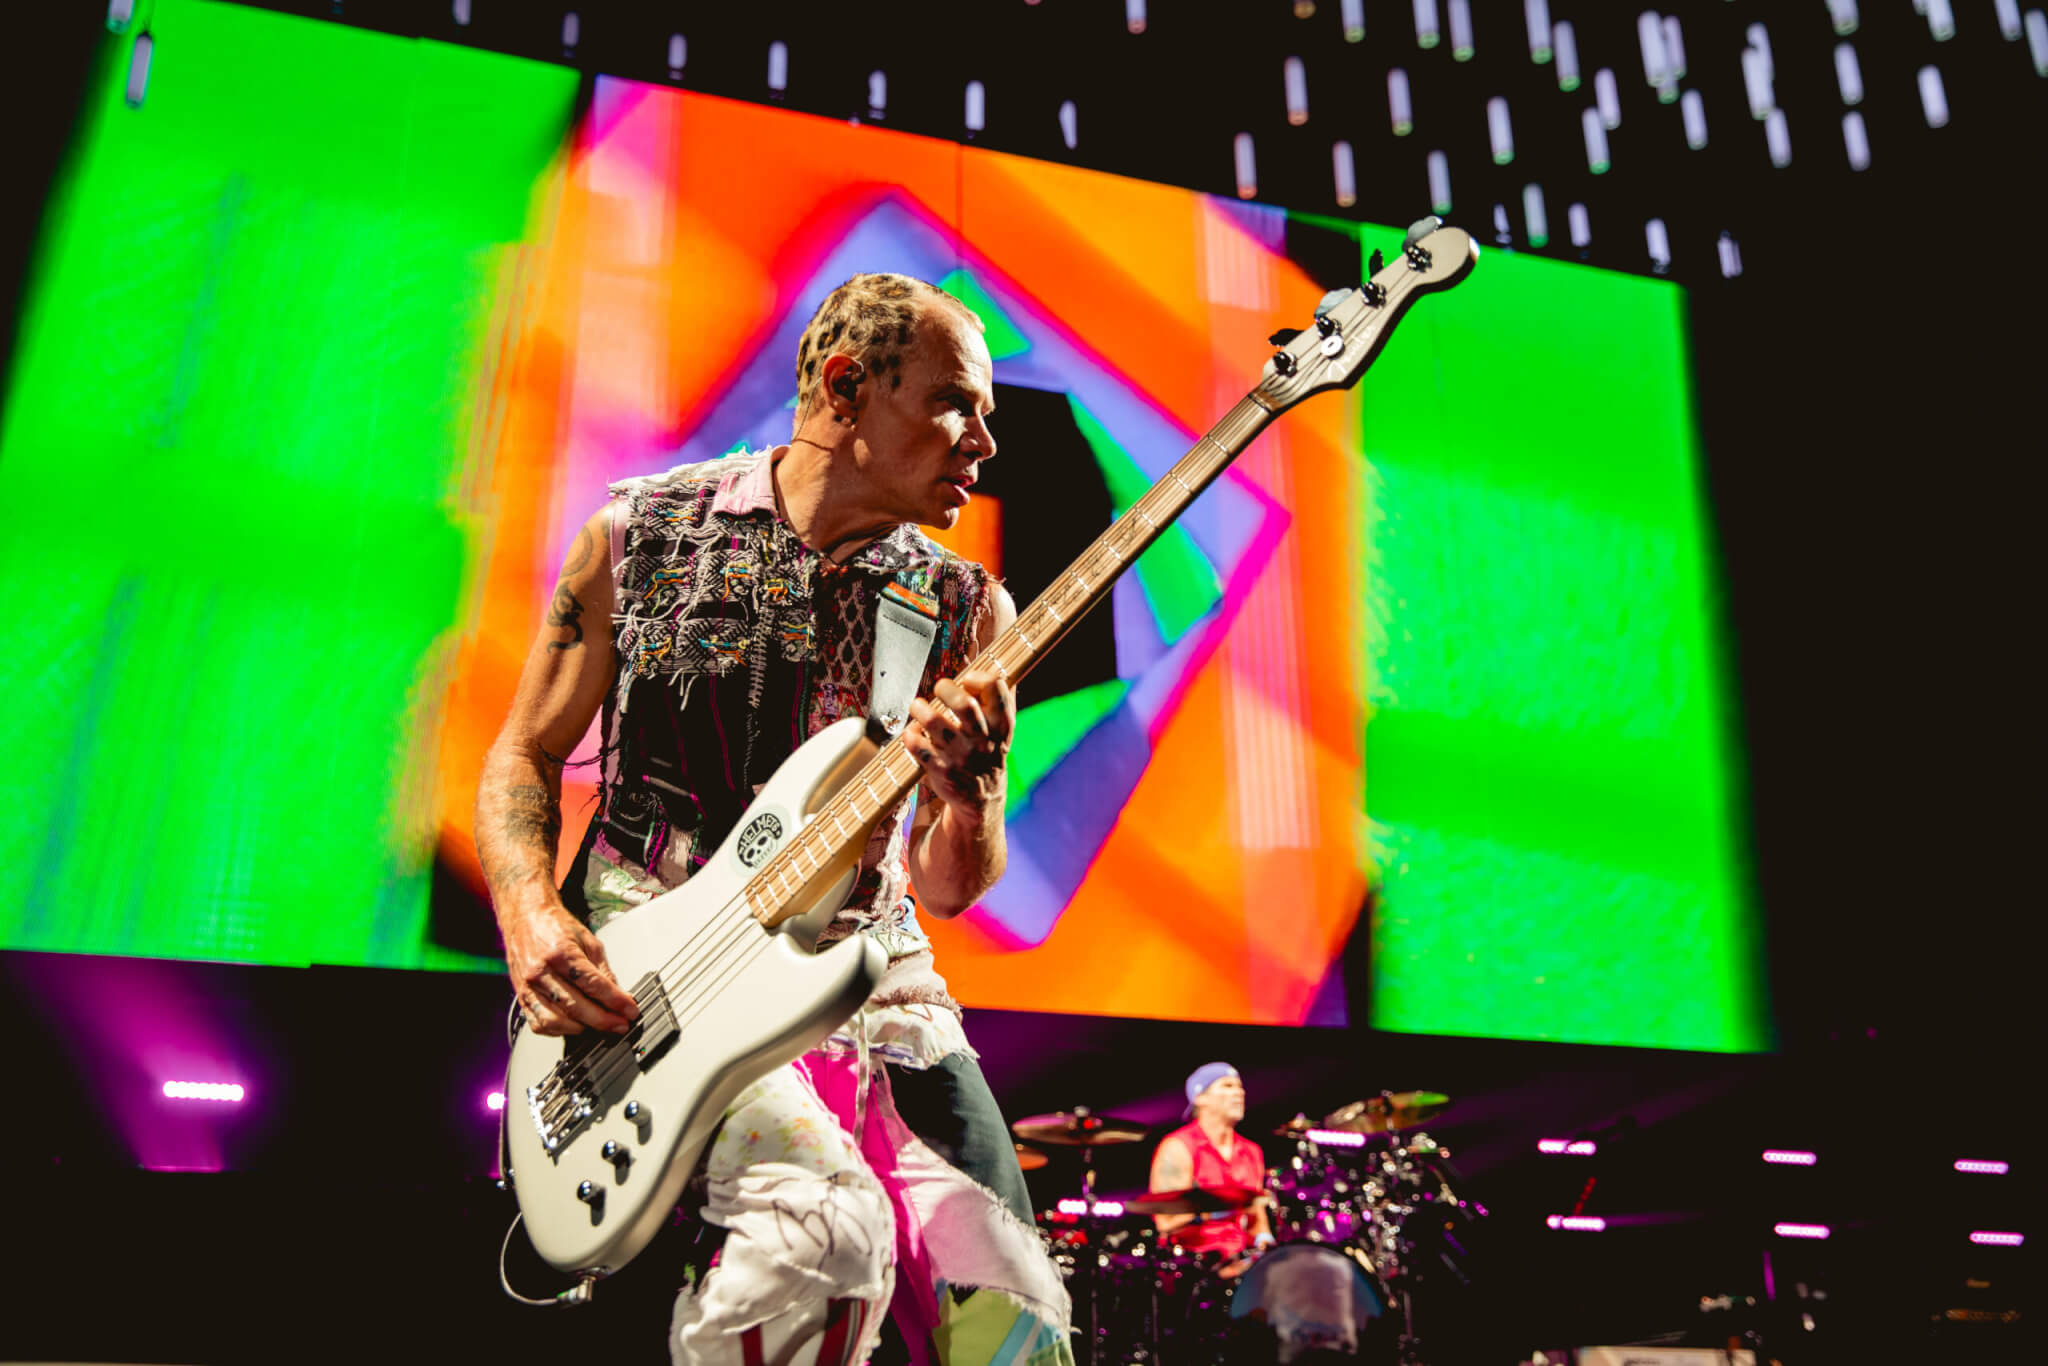 Red Hot Chili Peppers' guitarist, Flea, performing in 2017